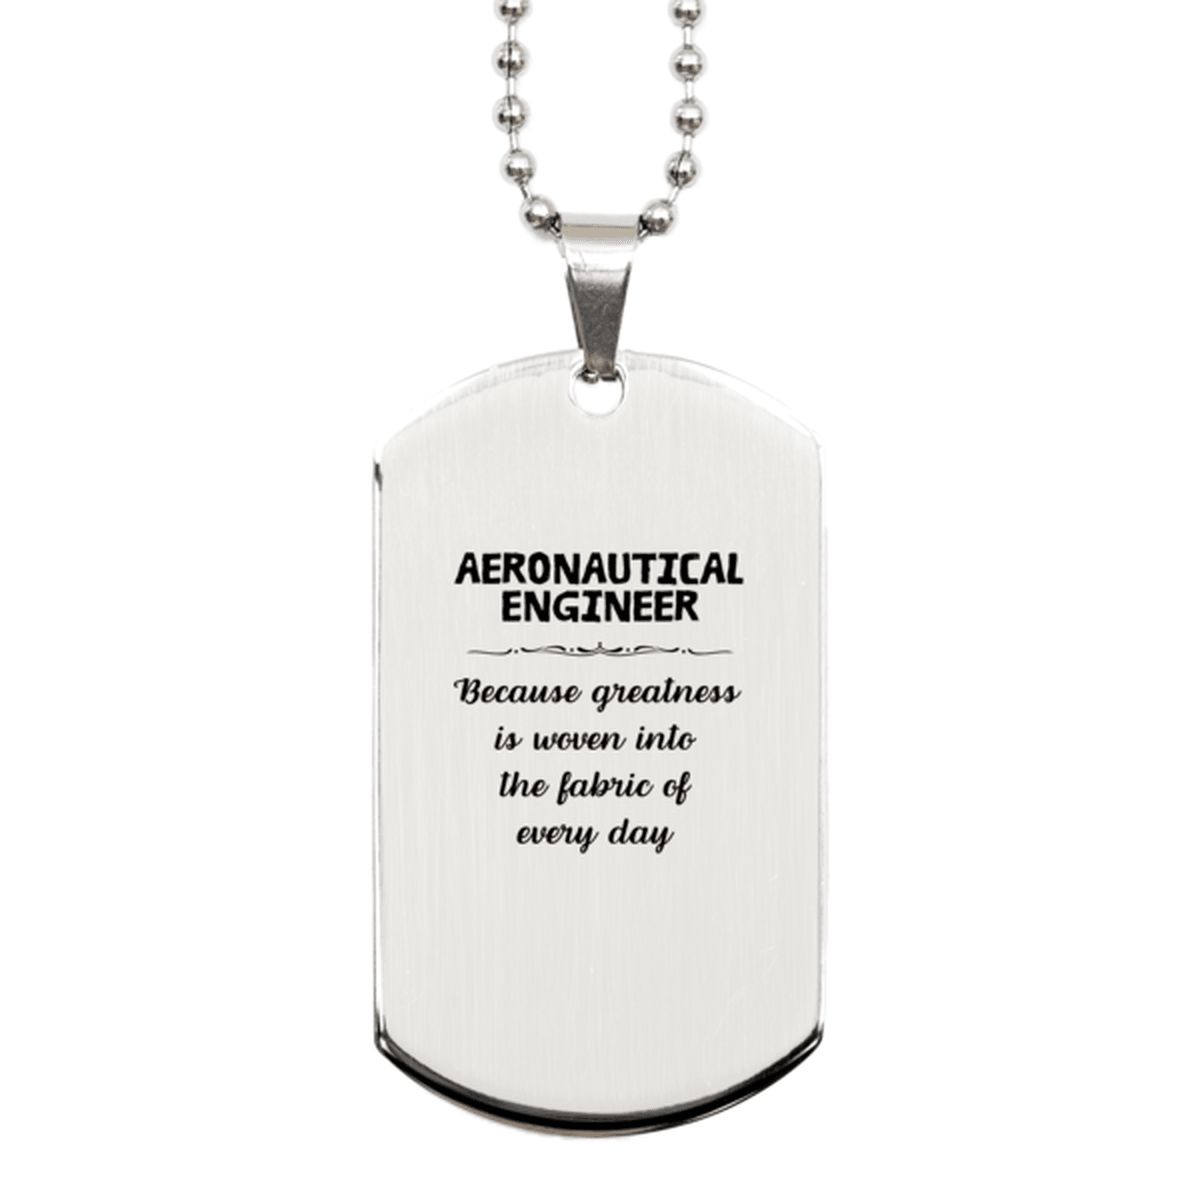 Sarcastic Aeronautical Engineer Silver Dog Tag Gifts, Christmas Holiday Gifts for Aeronautical Engineer Birthday, Aeronautical Engineer: Because greatness is woven into the fabric of every day, Coworkers, Friends - Mallard Moon Gift Shop